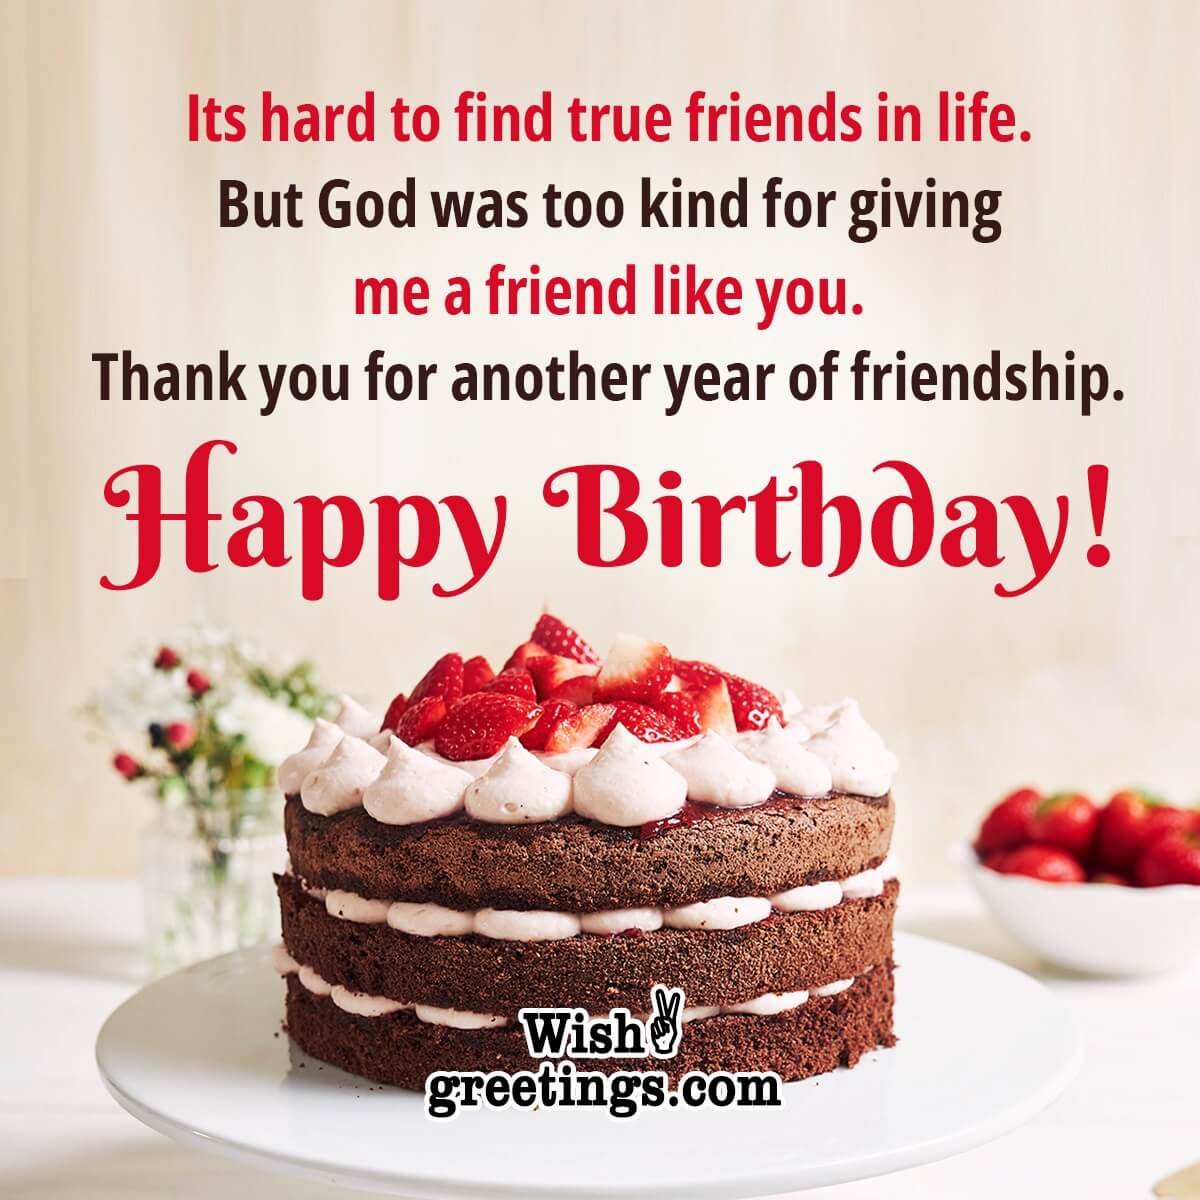 Best Happy Birthday Messages for Friends